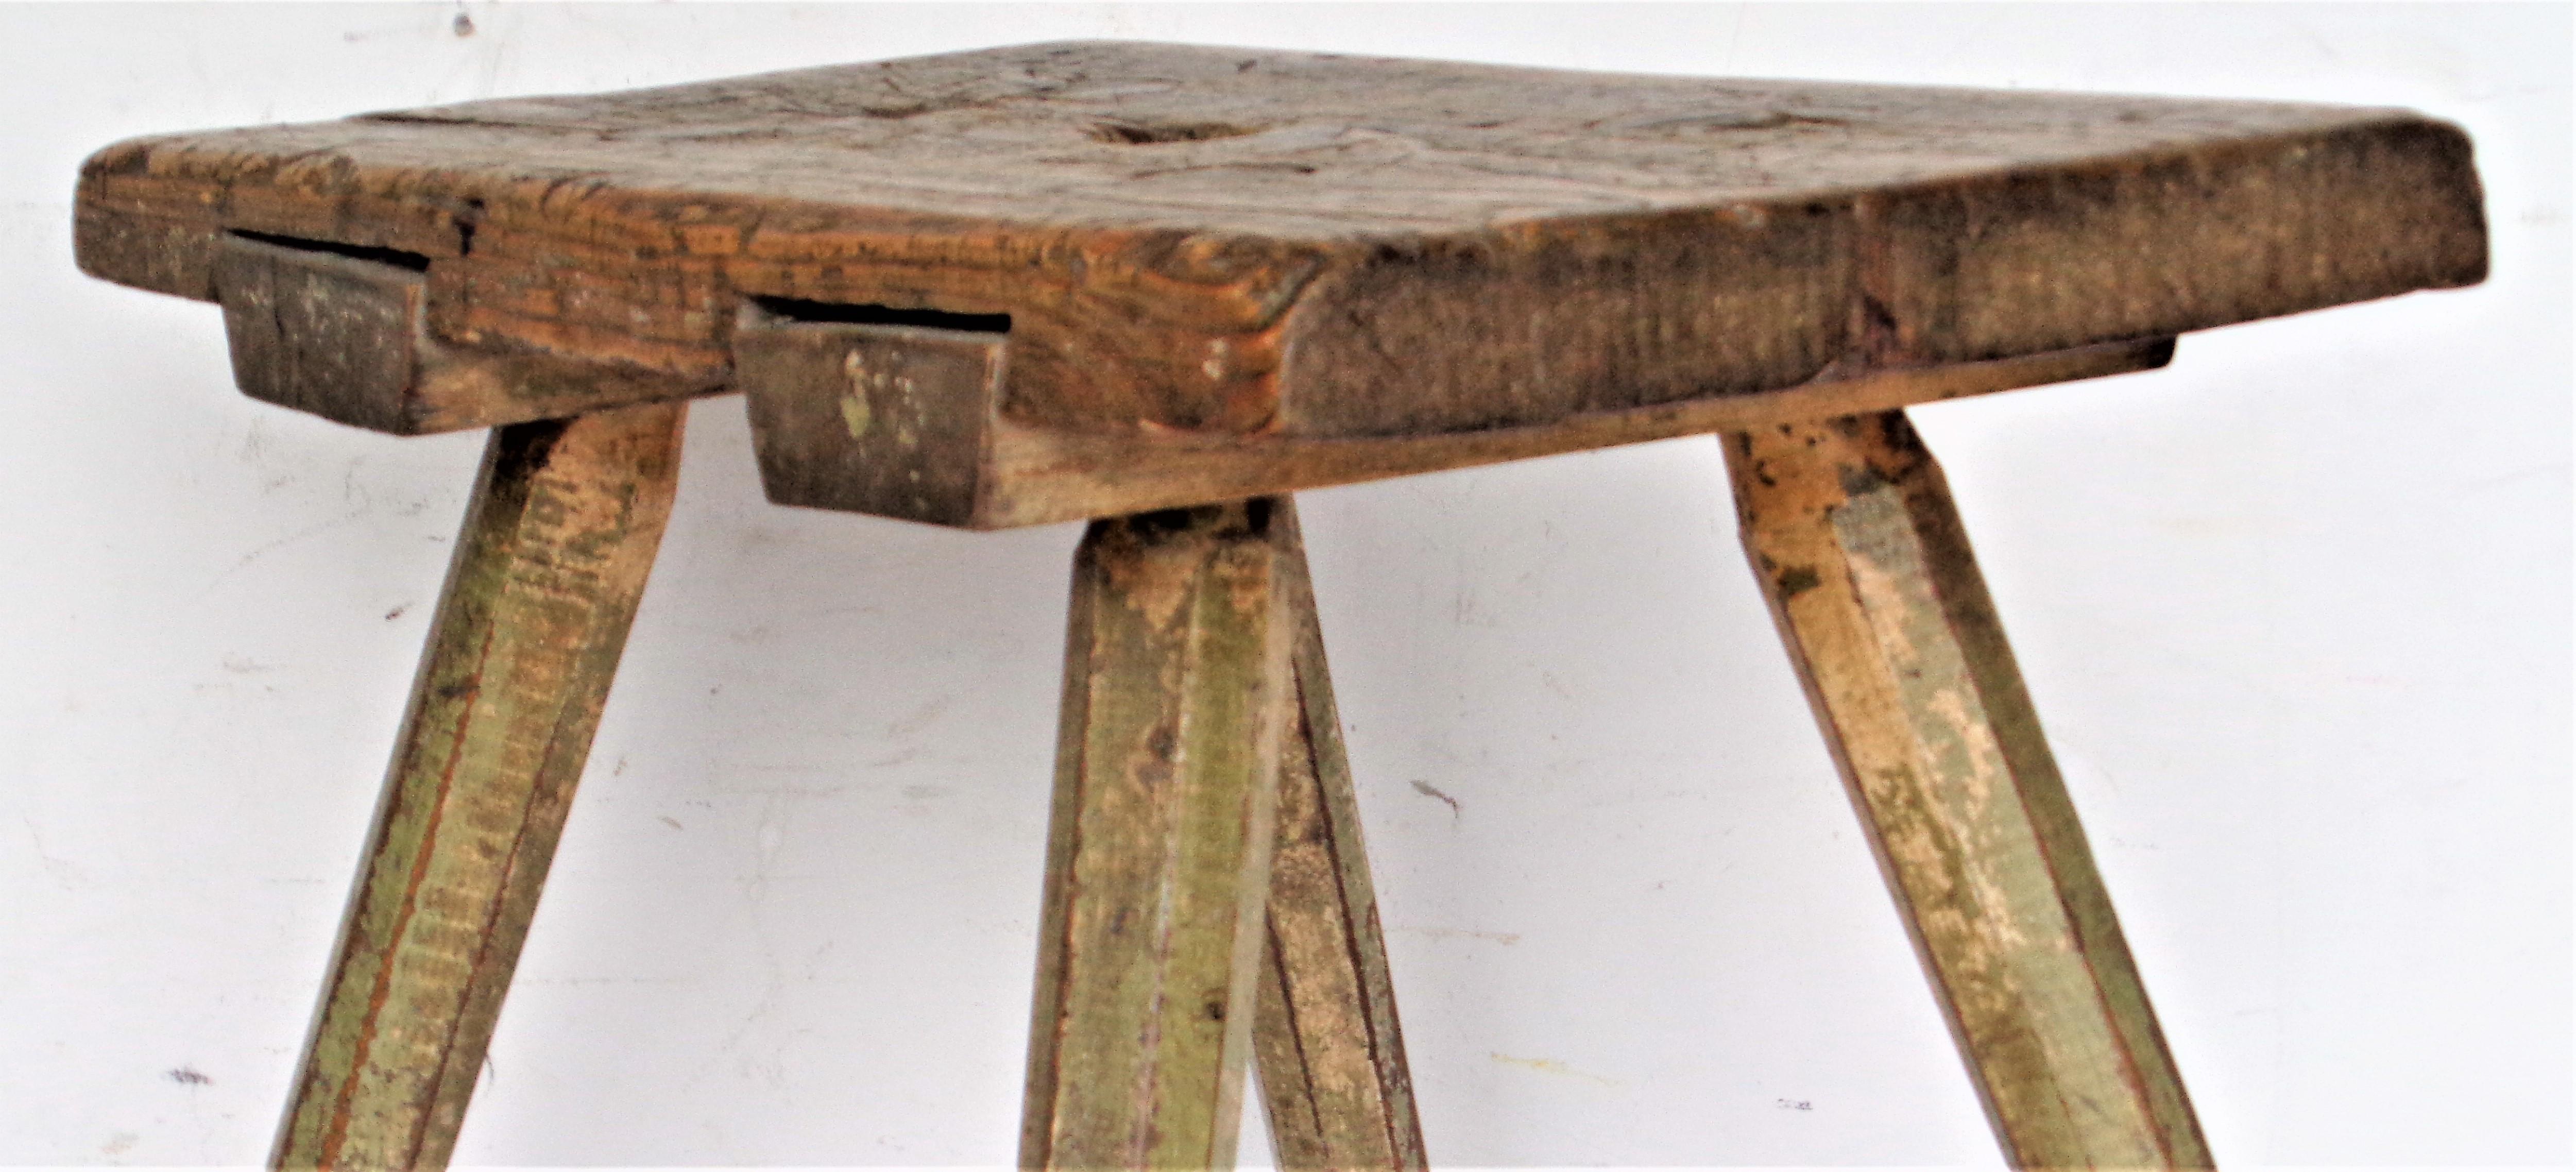 19th century American country hand crafted primitive work stool with four chamfered splayed legs with early through pegged construction. Exceptionally beautifully aged original warm pea green and cream painted surface to legs and underside of seat.